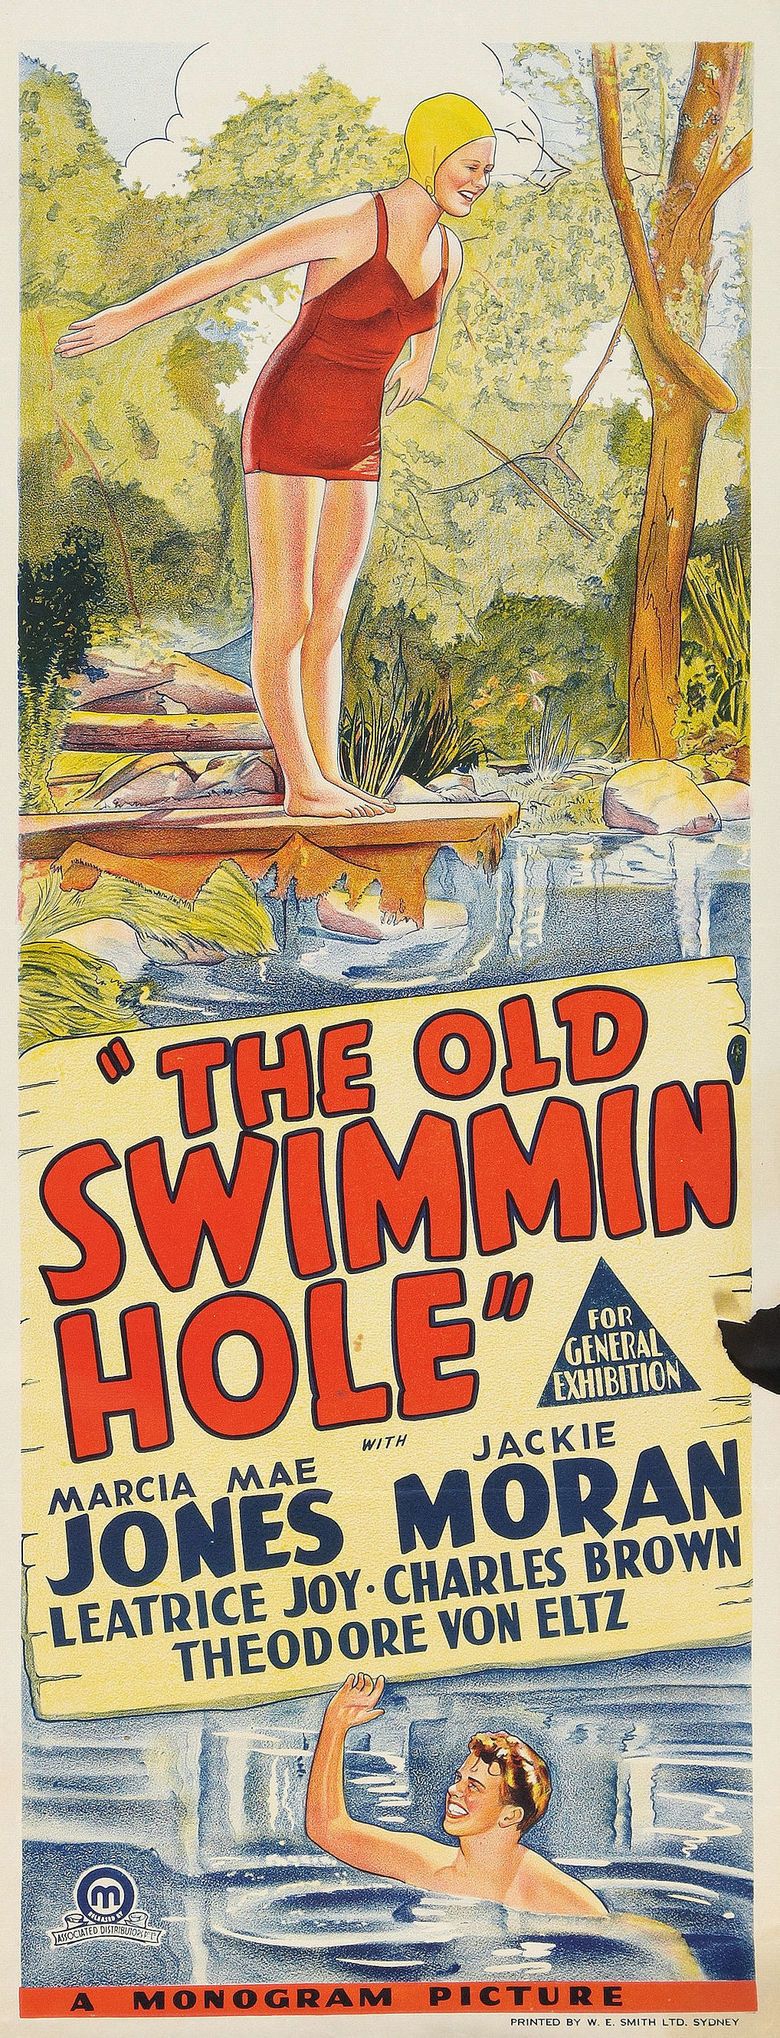 The Old Swimmin Hole (1940 film) movie poster